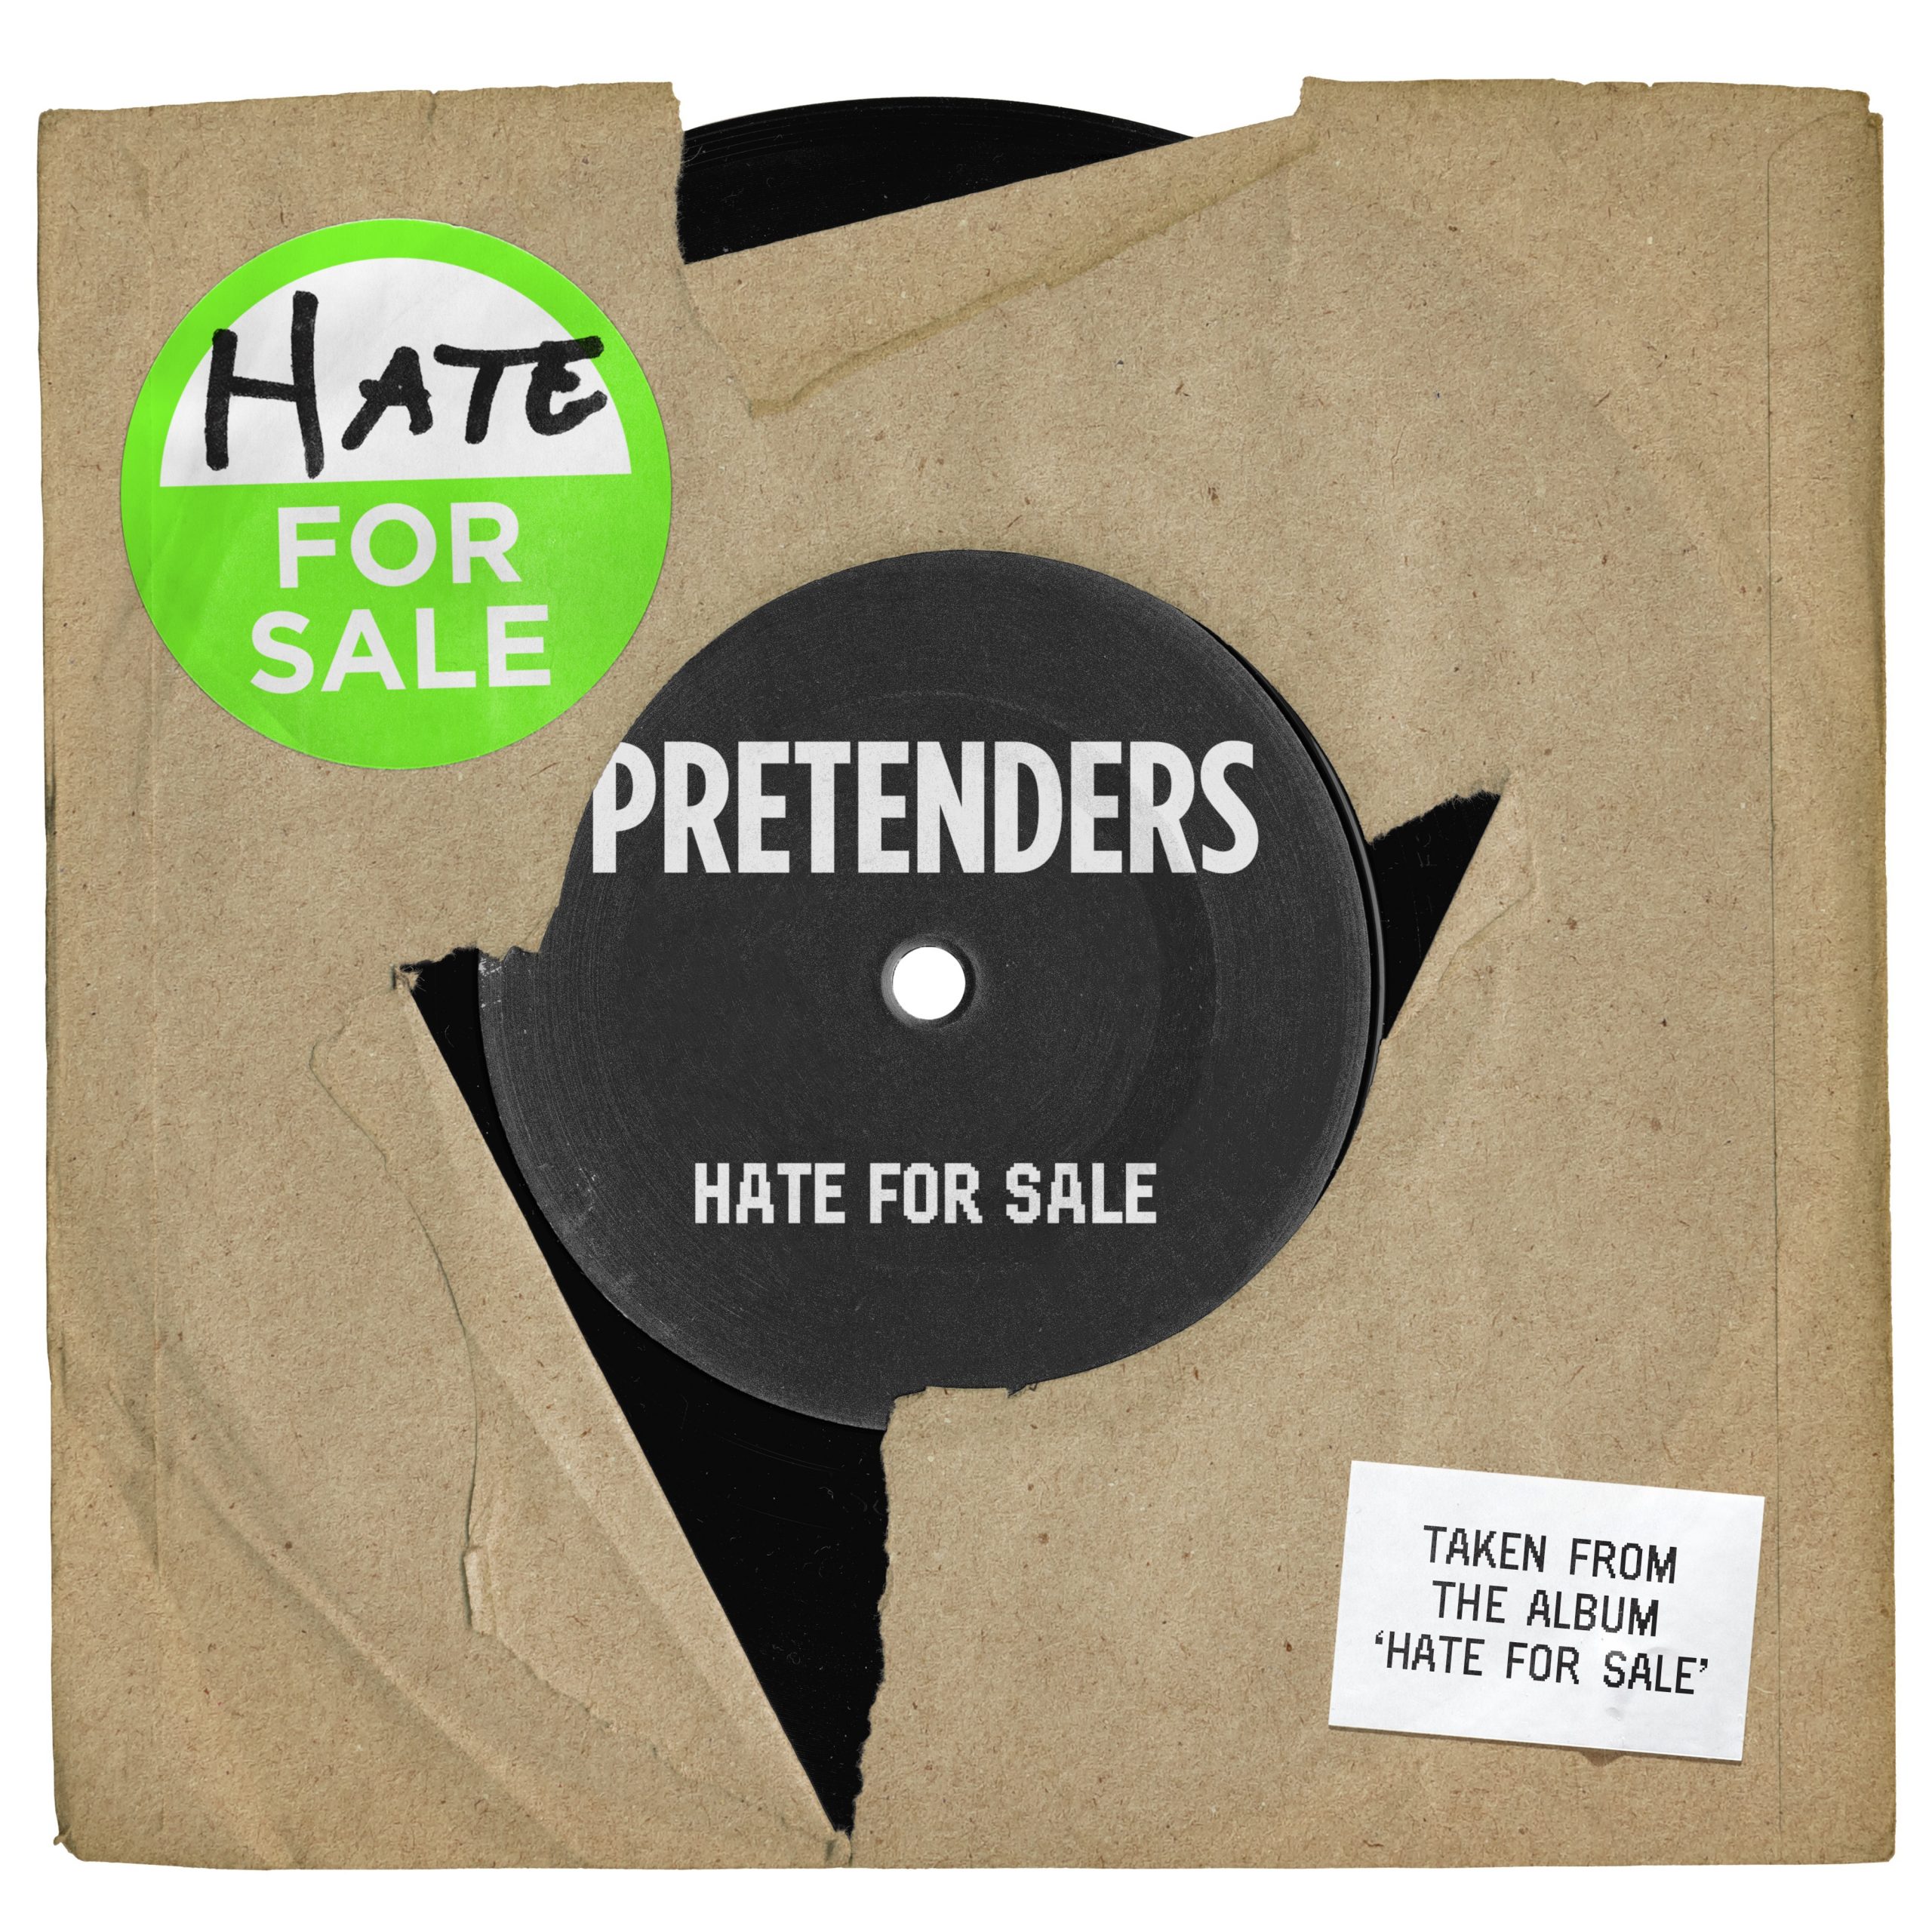 THE PRETENDERS reveal their brand-new single 'Hate For Sale' - Listen Now 